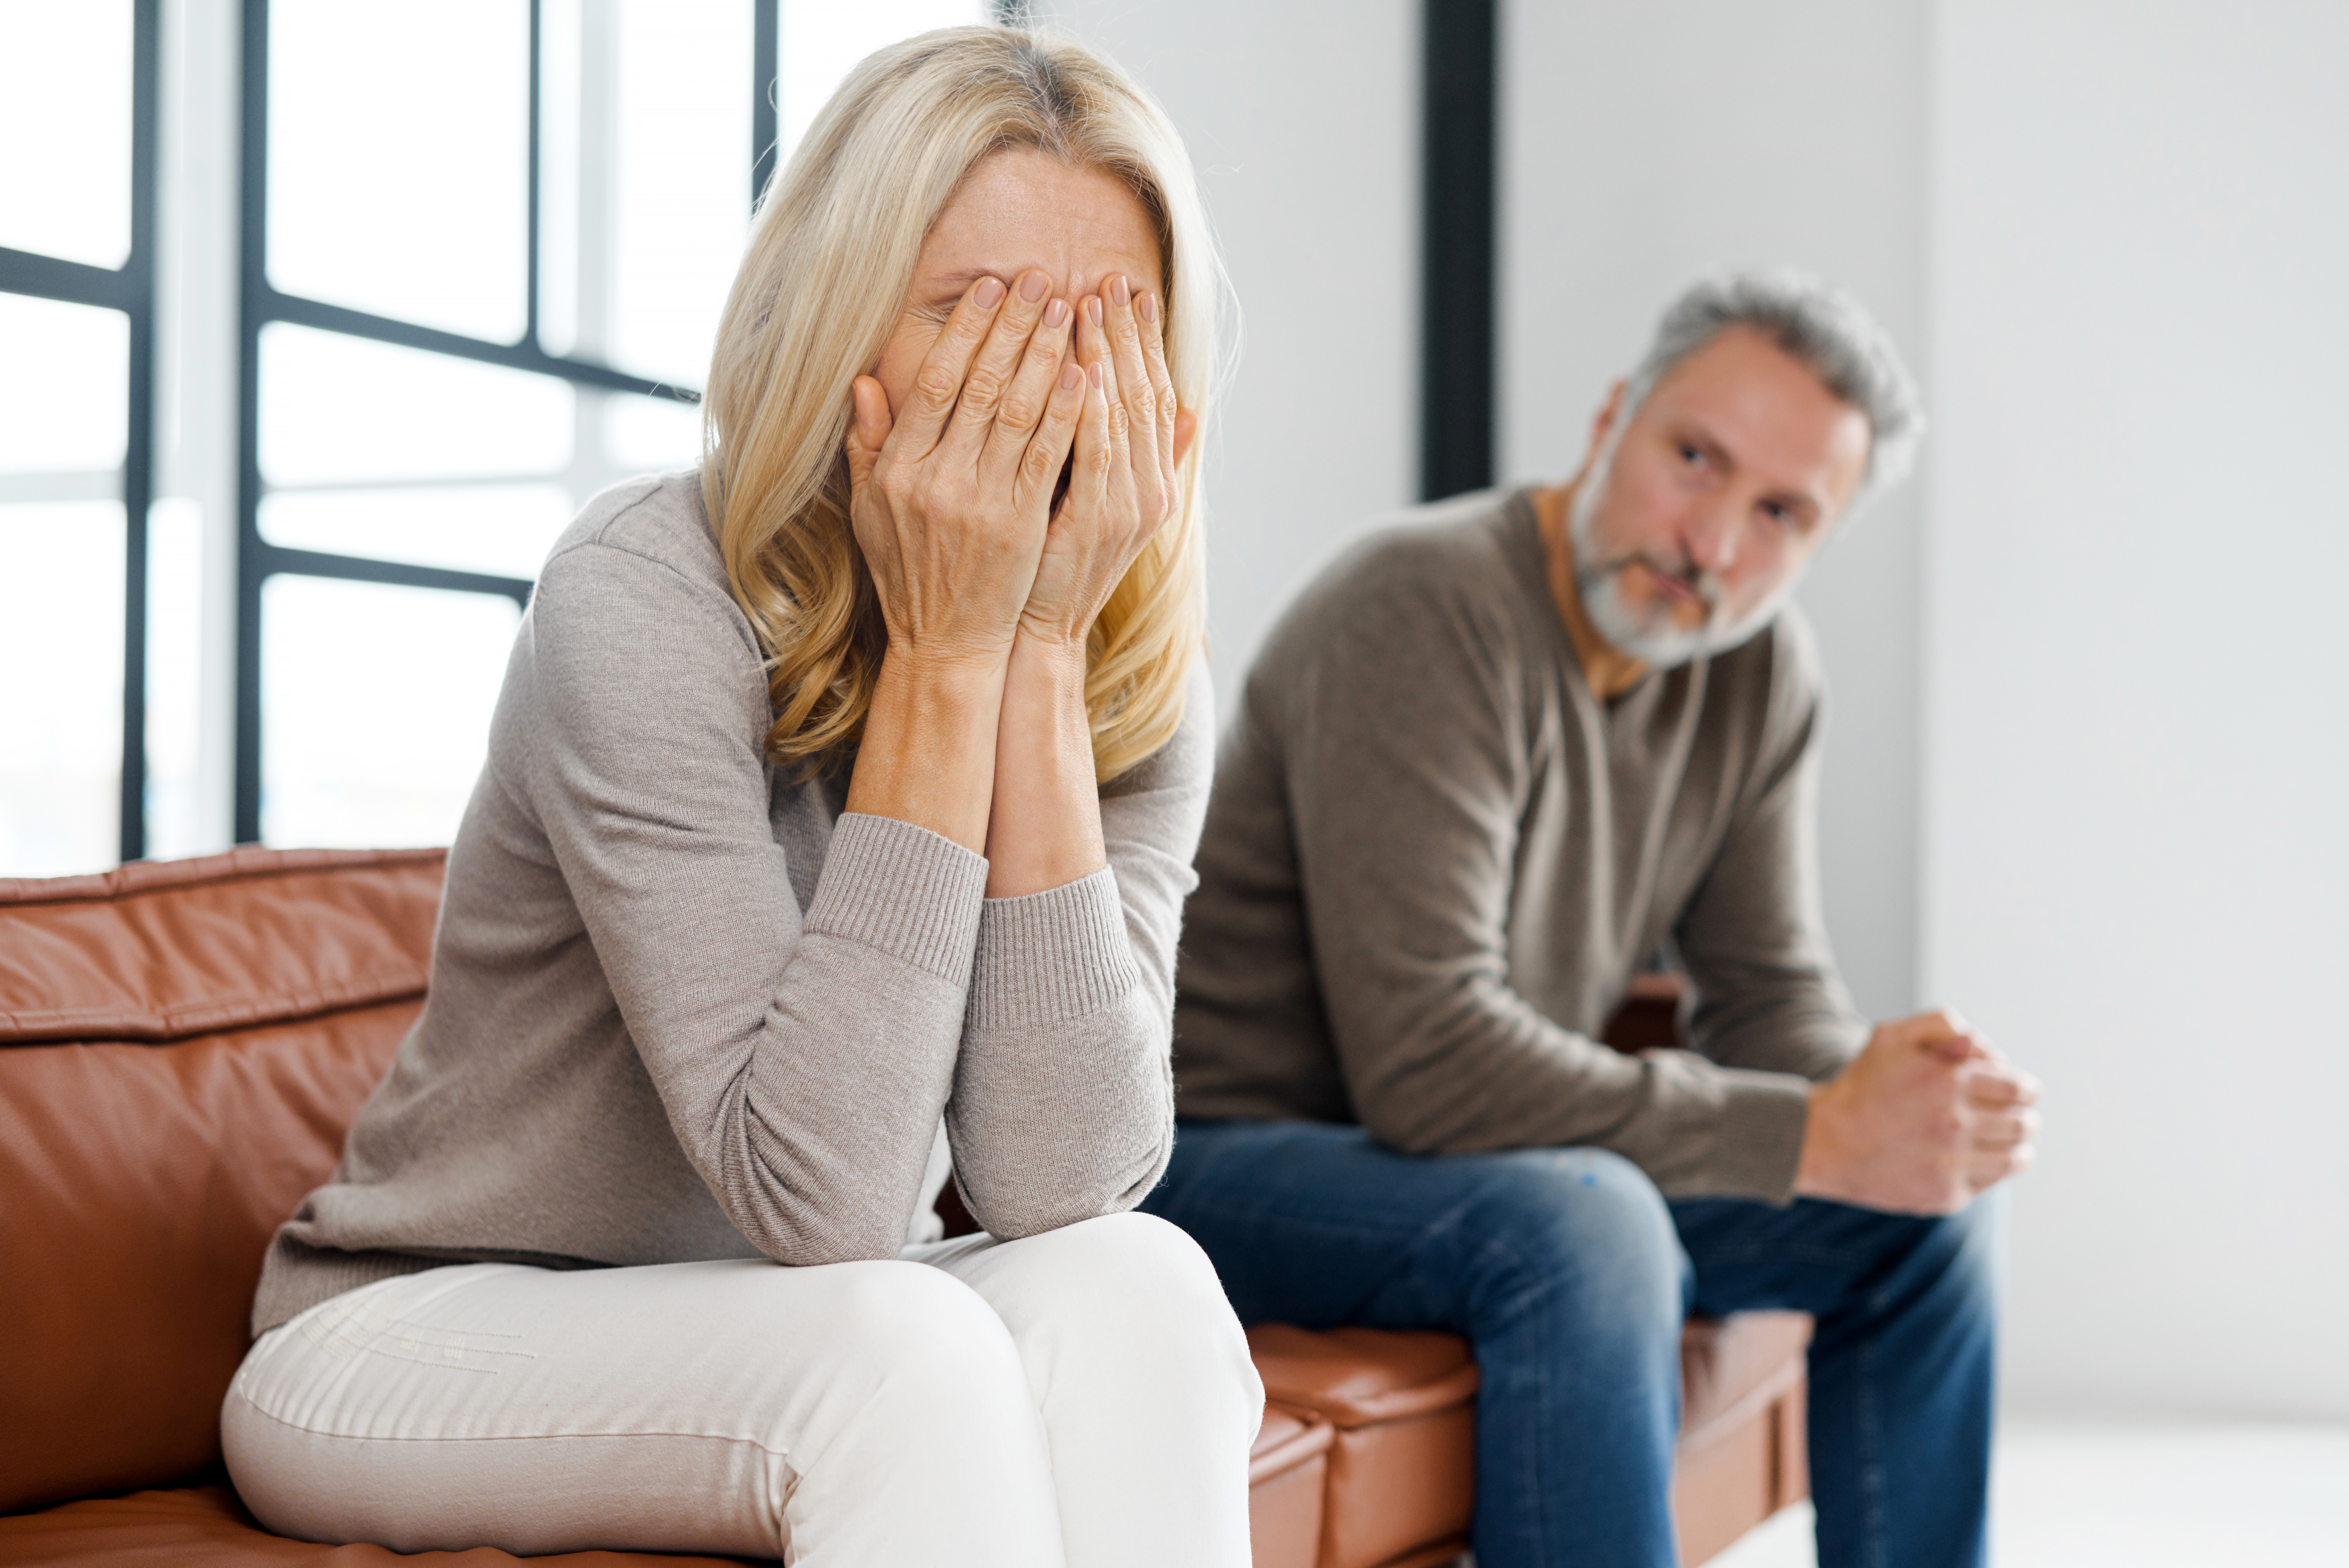 Upset middle-aged couple arguing at home | Source: Shutterstock